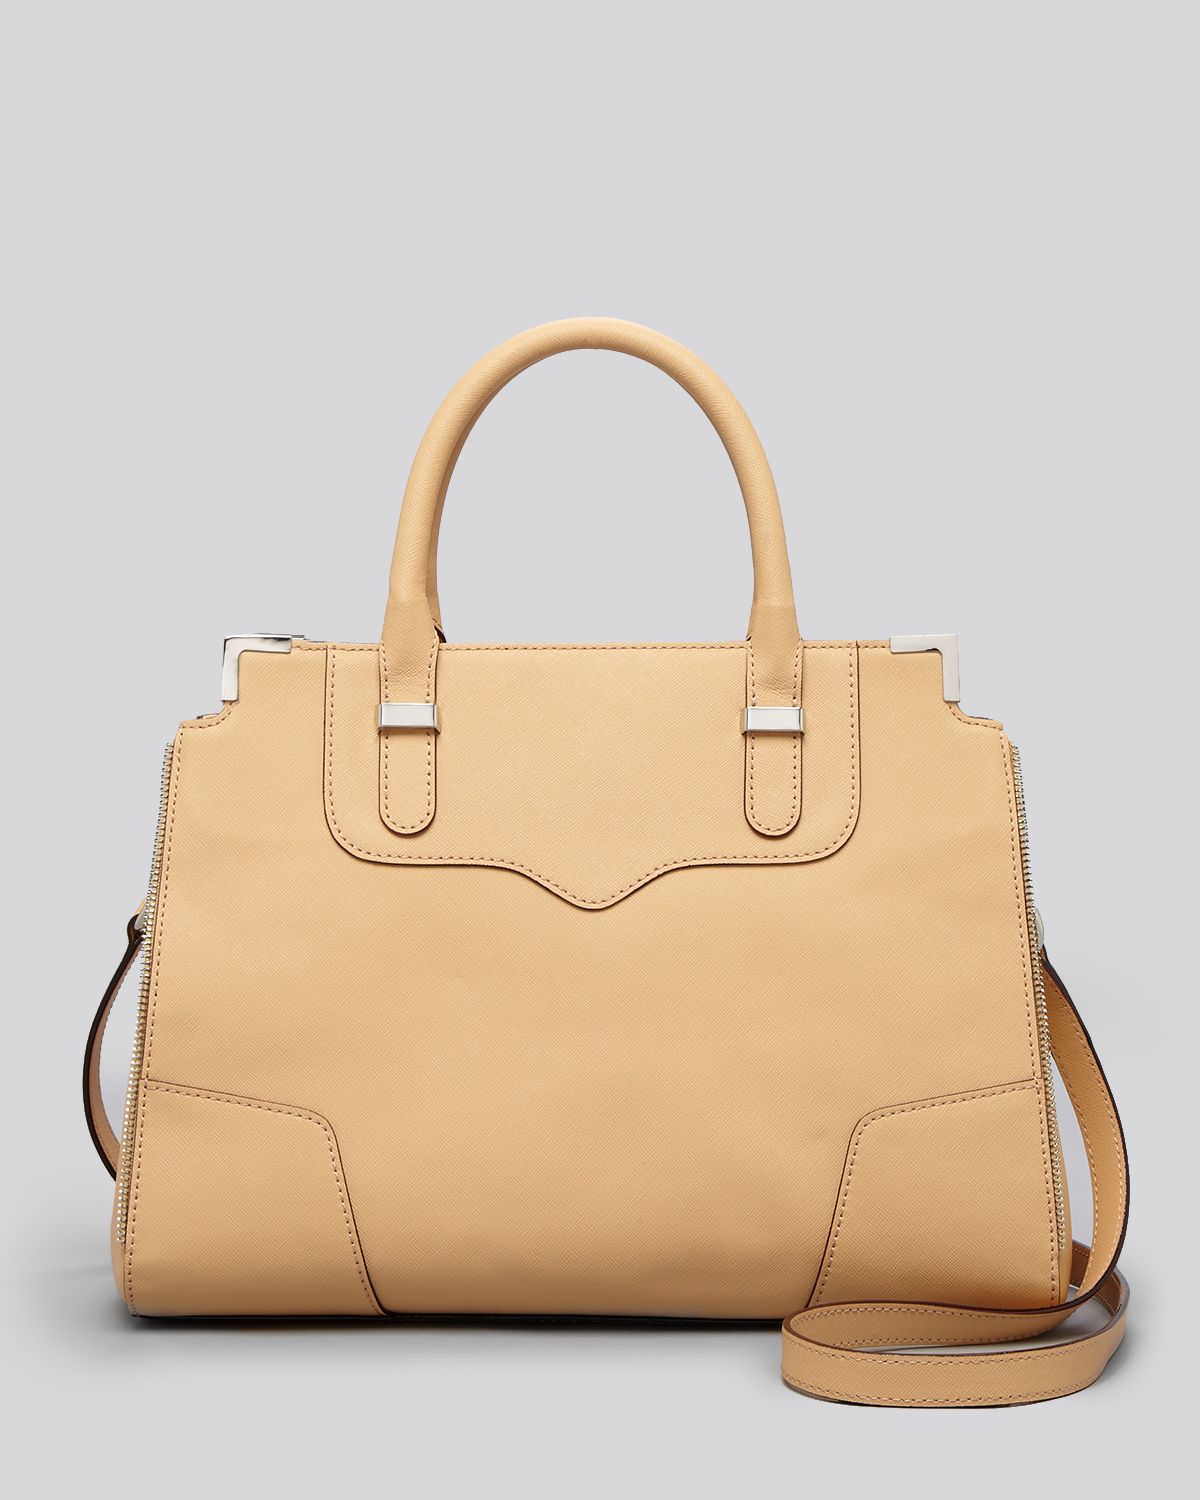 Rebecca Minkoff Amorous Satchel in Nude (Natural) - Lyst